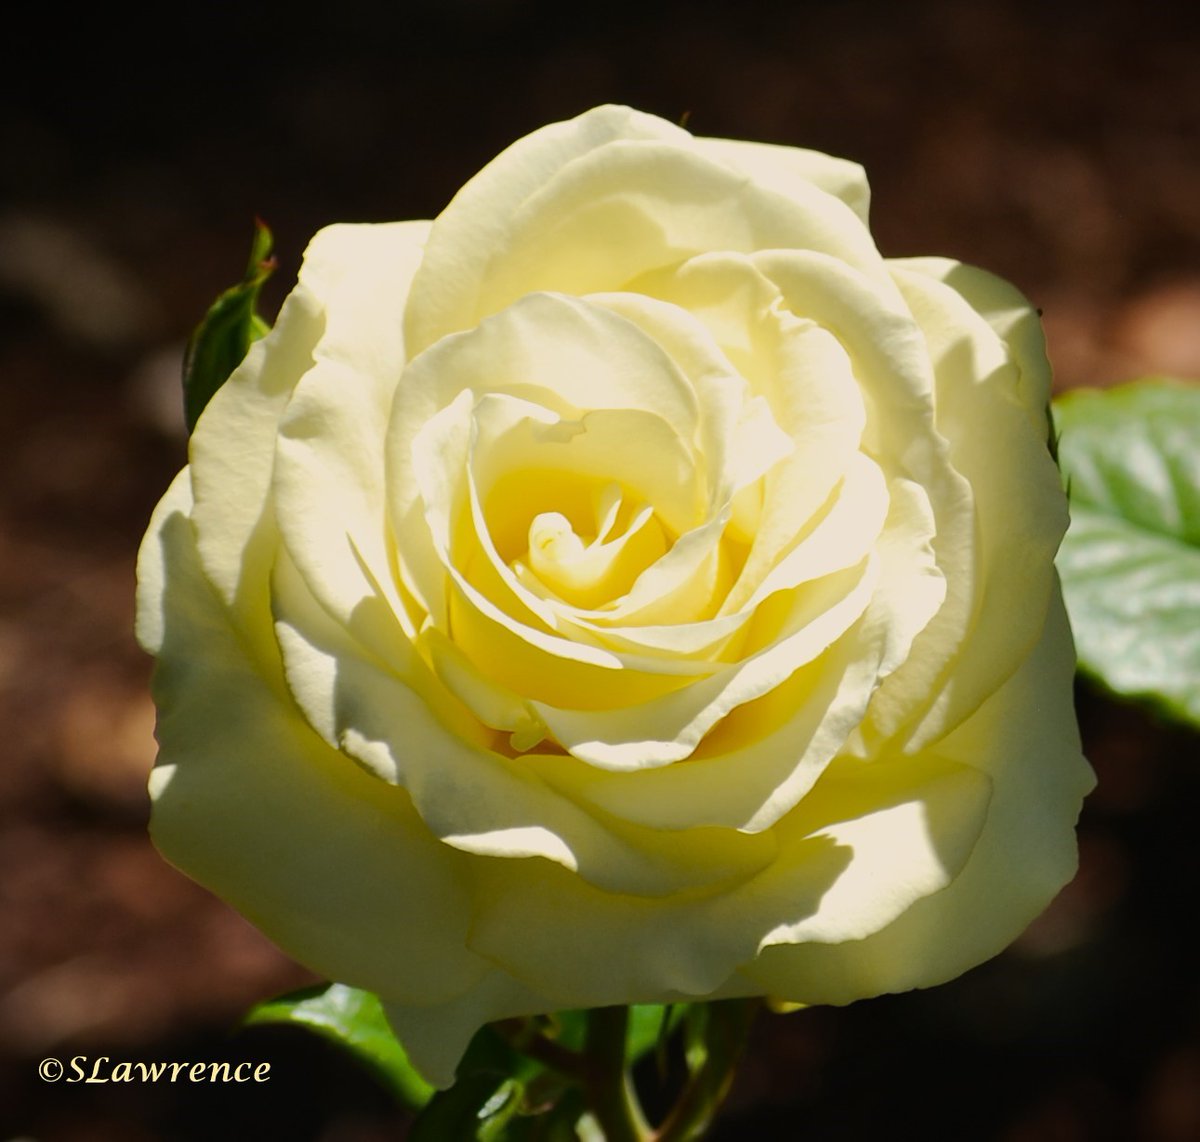 GM everyone. Are we all excited for another #RoseWednesday? Enjoy your day. #photo #photography #photooftheday #PhotographyIsArt #TwitterPhotographyCommunity #TwitterNaturePhotography #TwitterNatureCommunity #NaturePhotography #nature #rose #flowerphotography #floral #Flowers